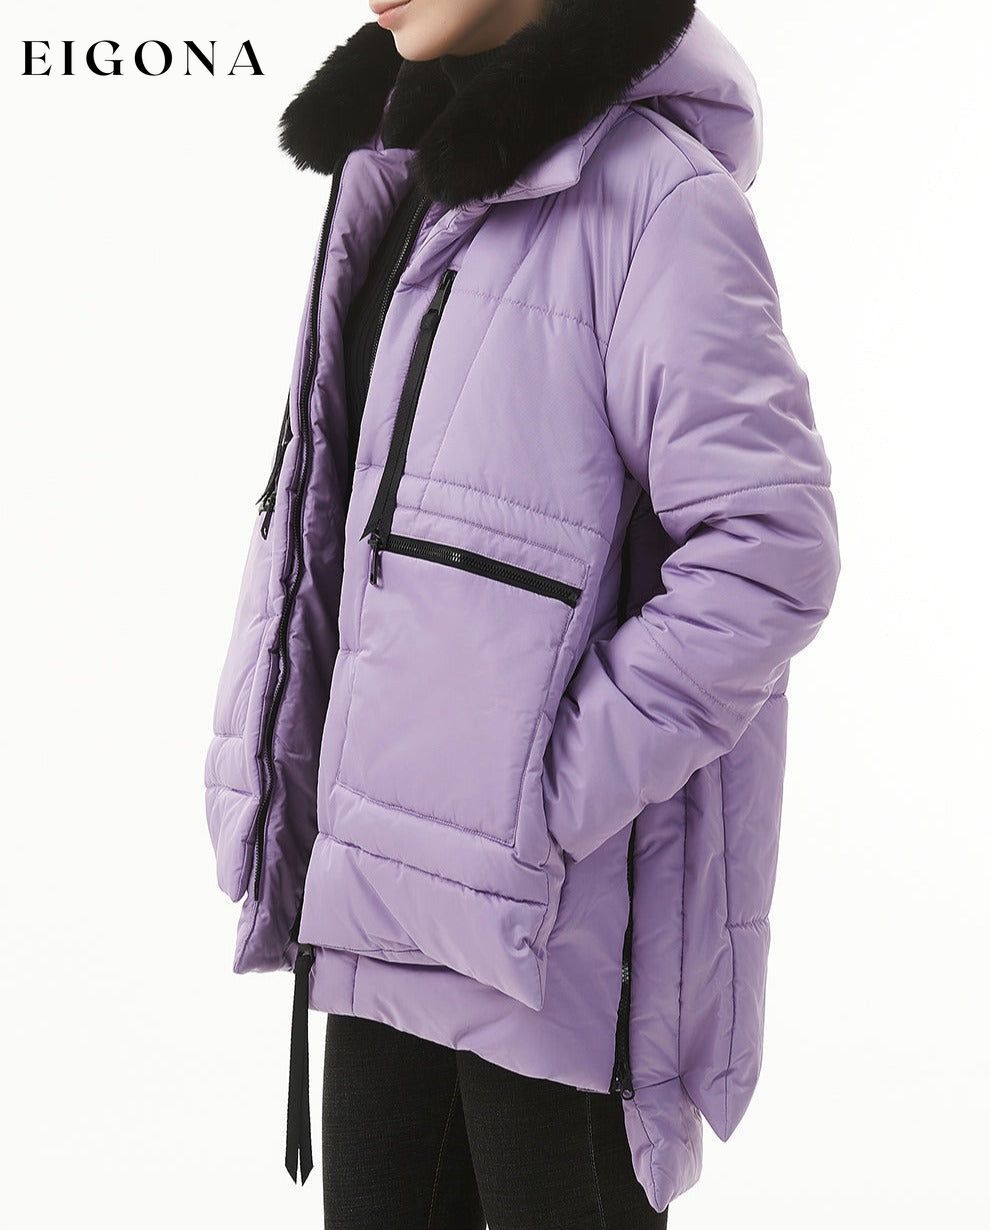 Wisteria Plush Linen Zip Up Hooded Puffer Coat clothes Color Purple Fabric Fleece Jackets & Coats Print Solid Color Season Winter Style Casual